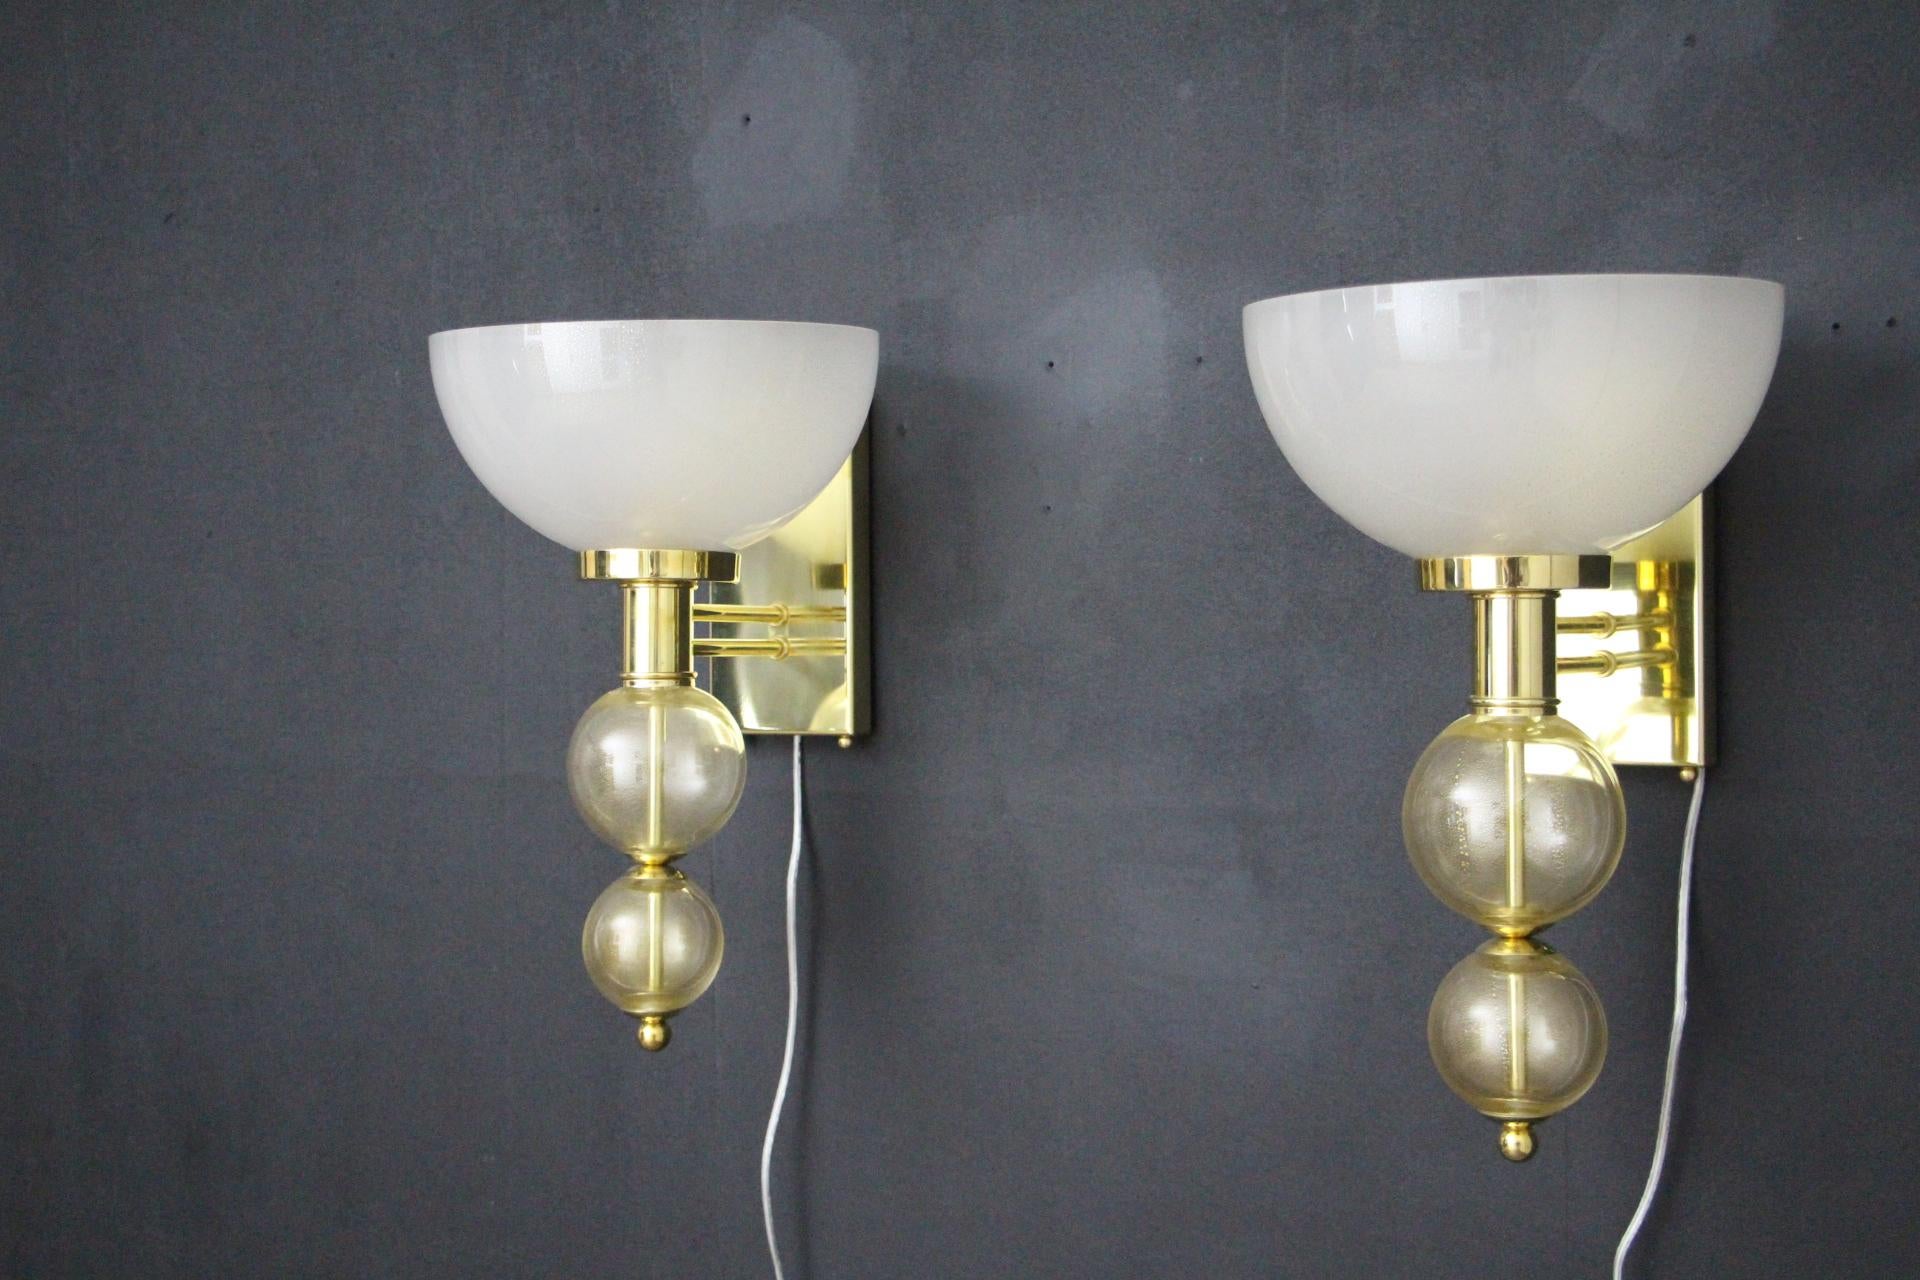 This magnificent pair of sconces features hand blown murano glass cup in a sweet ivory color with inclusions of golden bubbles inside the glass.They are sitting atop two gold spheres. Glass pieces are separated by polished brass fittings. Sconces